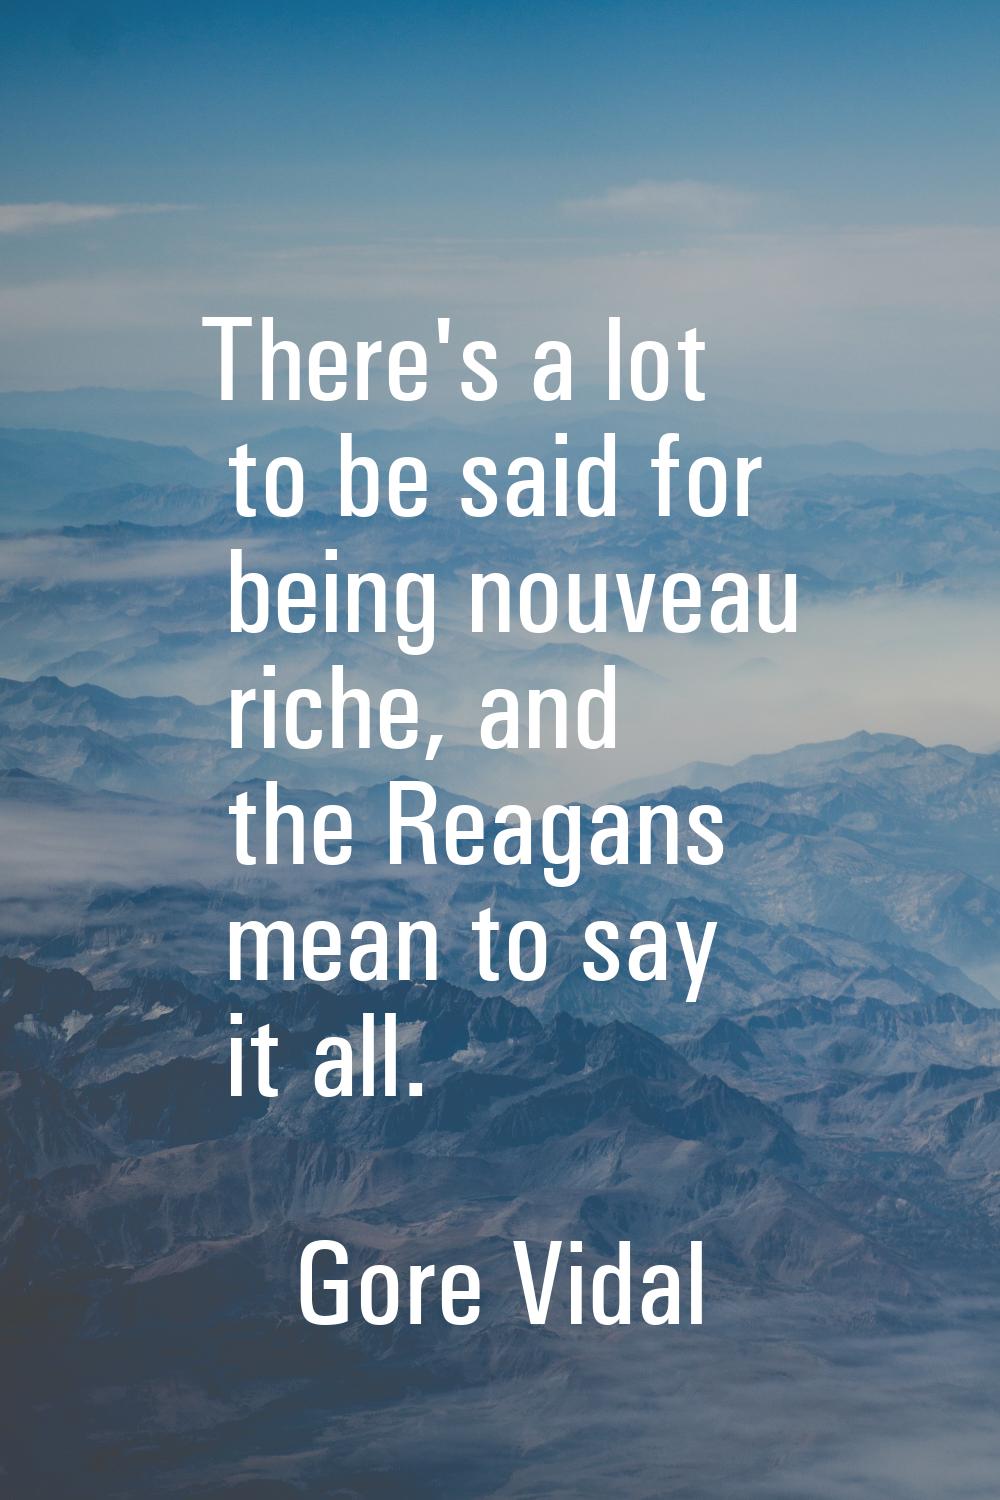 There's a lot to be said for being nouveau riche, and the Reagans mean to say it all.